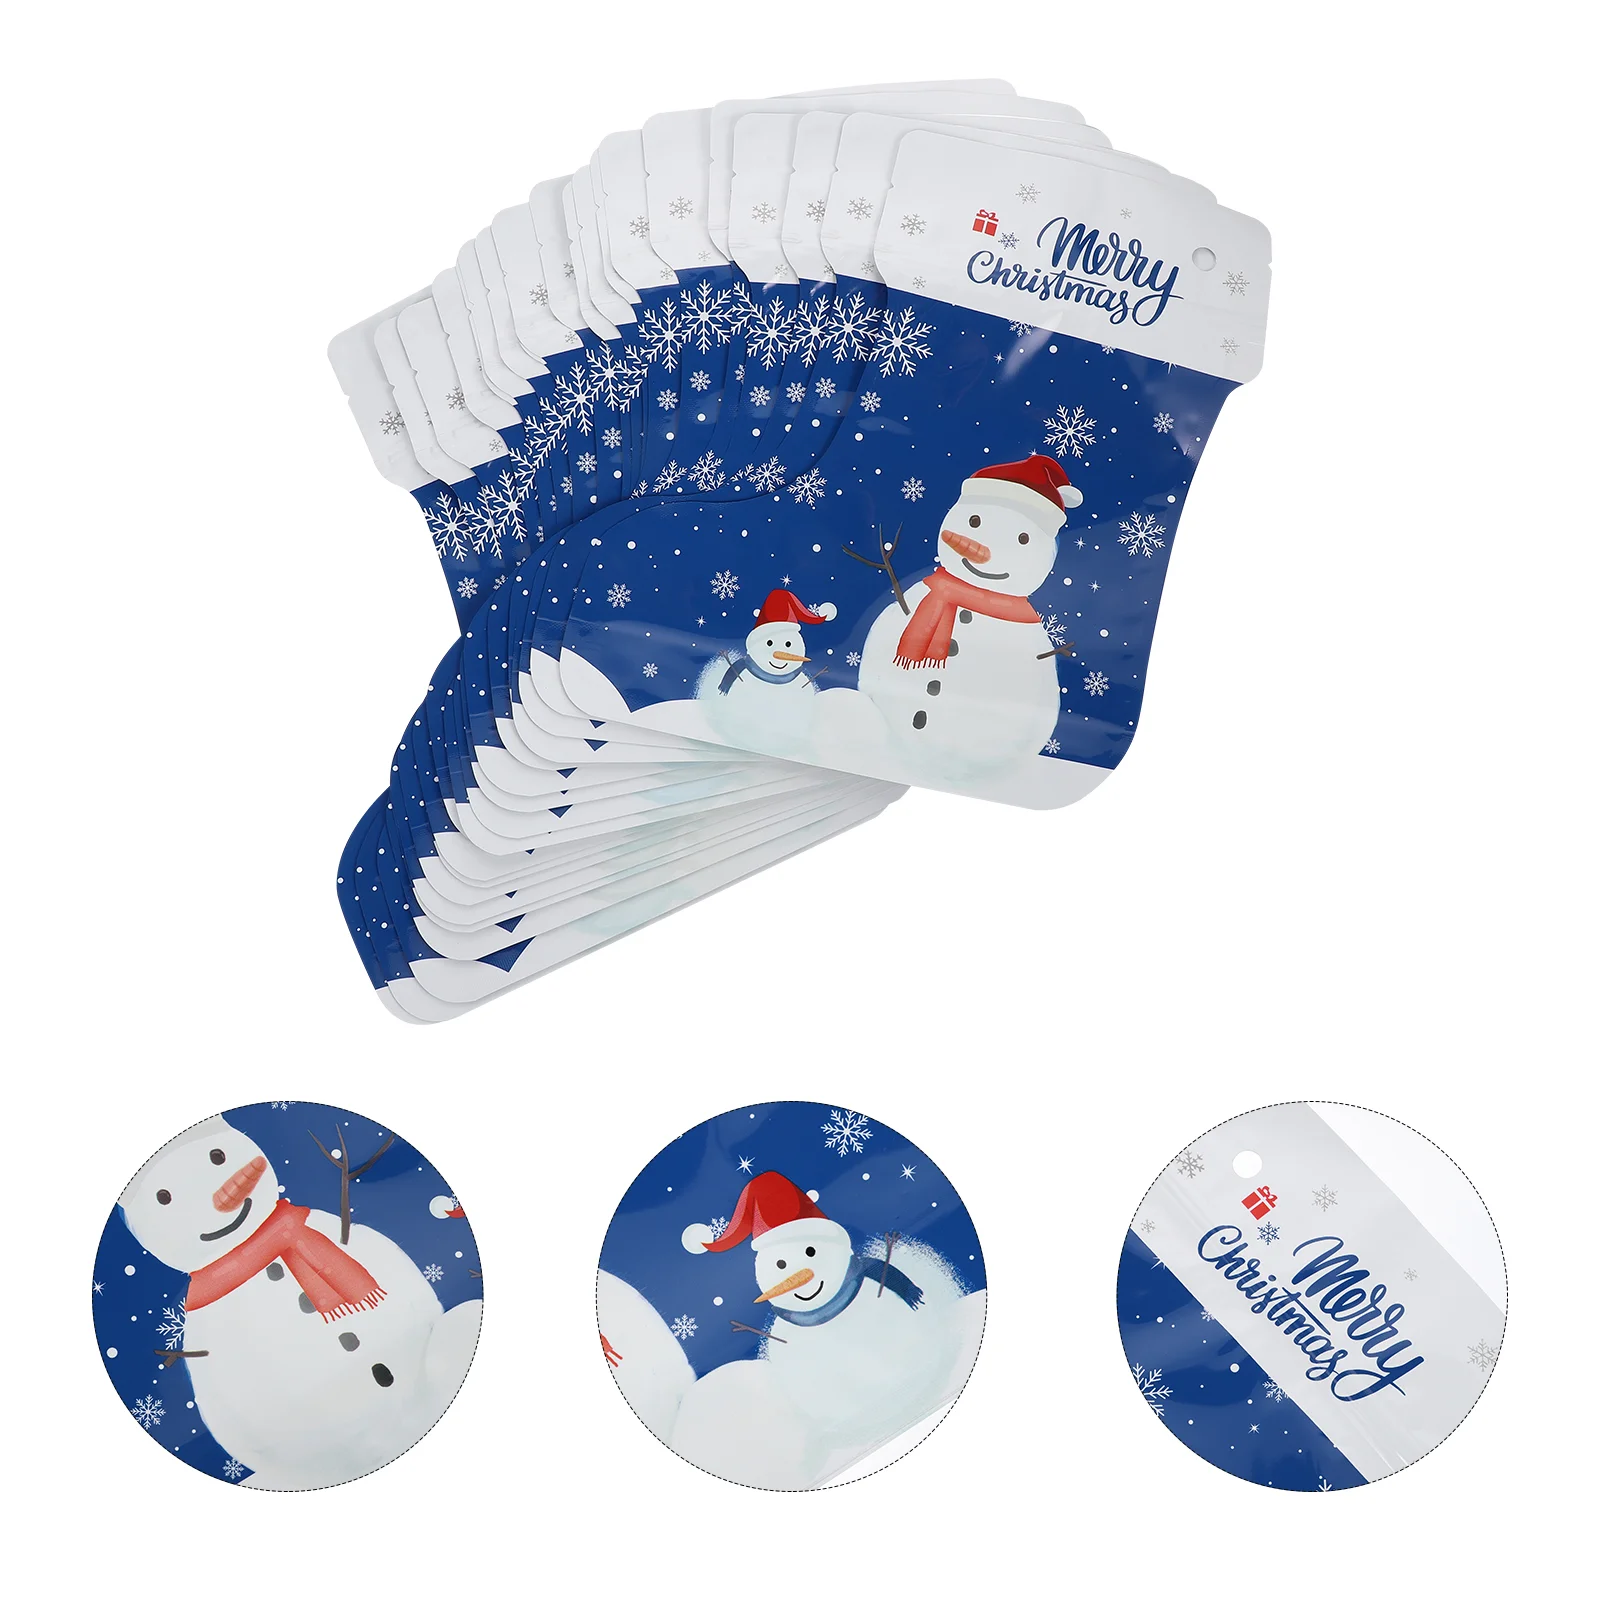 

20 Pcs Christmas Candy Bag Cartoon Socks Packing Pouches Aluminum Plating Portable Bags Self-sealing Wrapping Biscuit